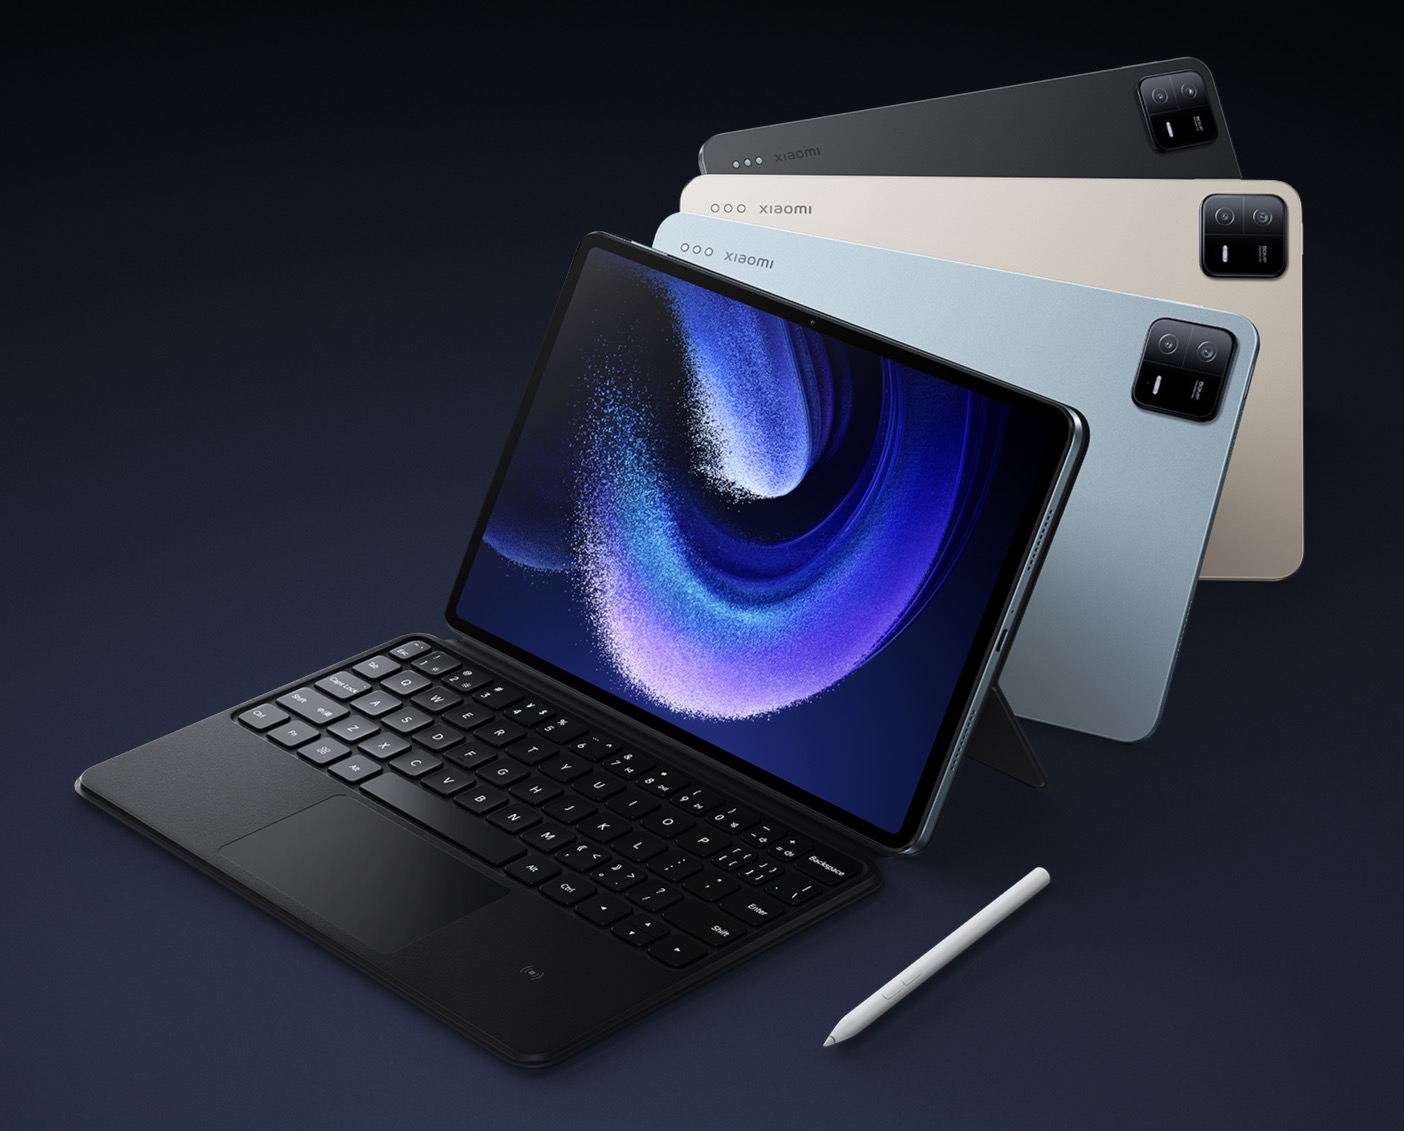 Xiaomi Pad 6 - Snapdragon 870, 13MP camera, 144Hz IPS display and 8840mAh from $290